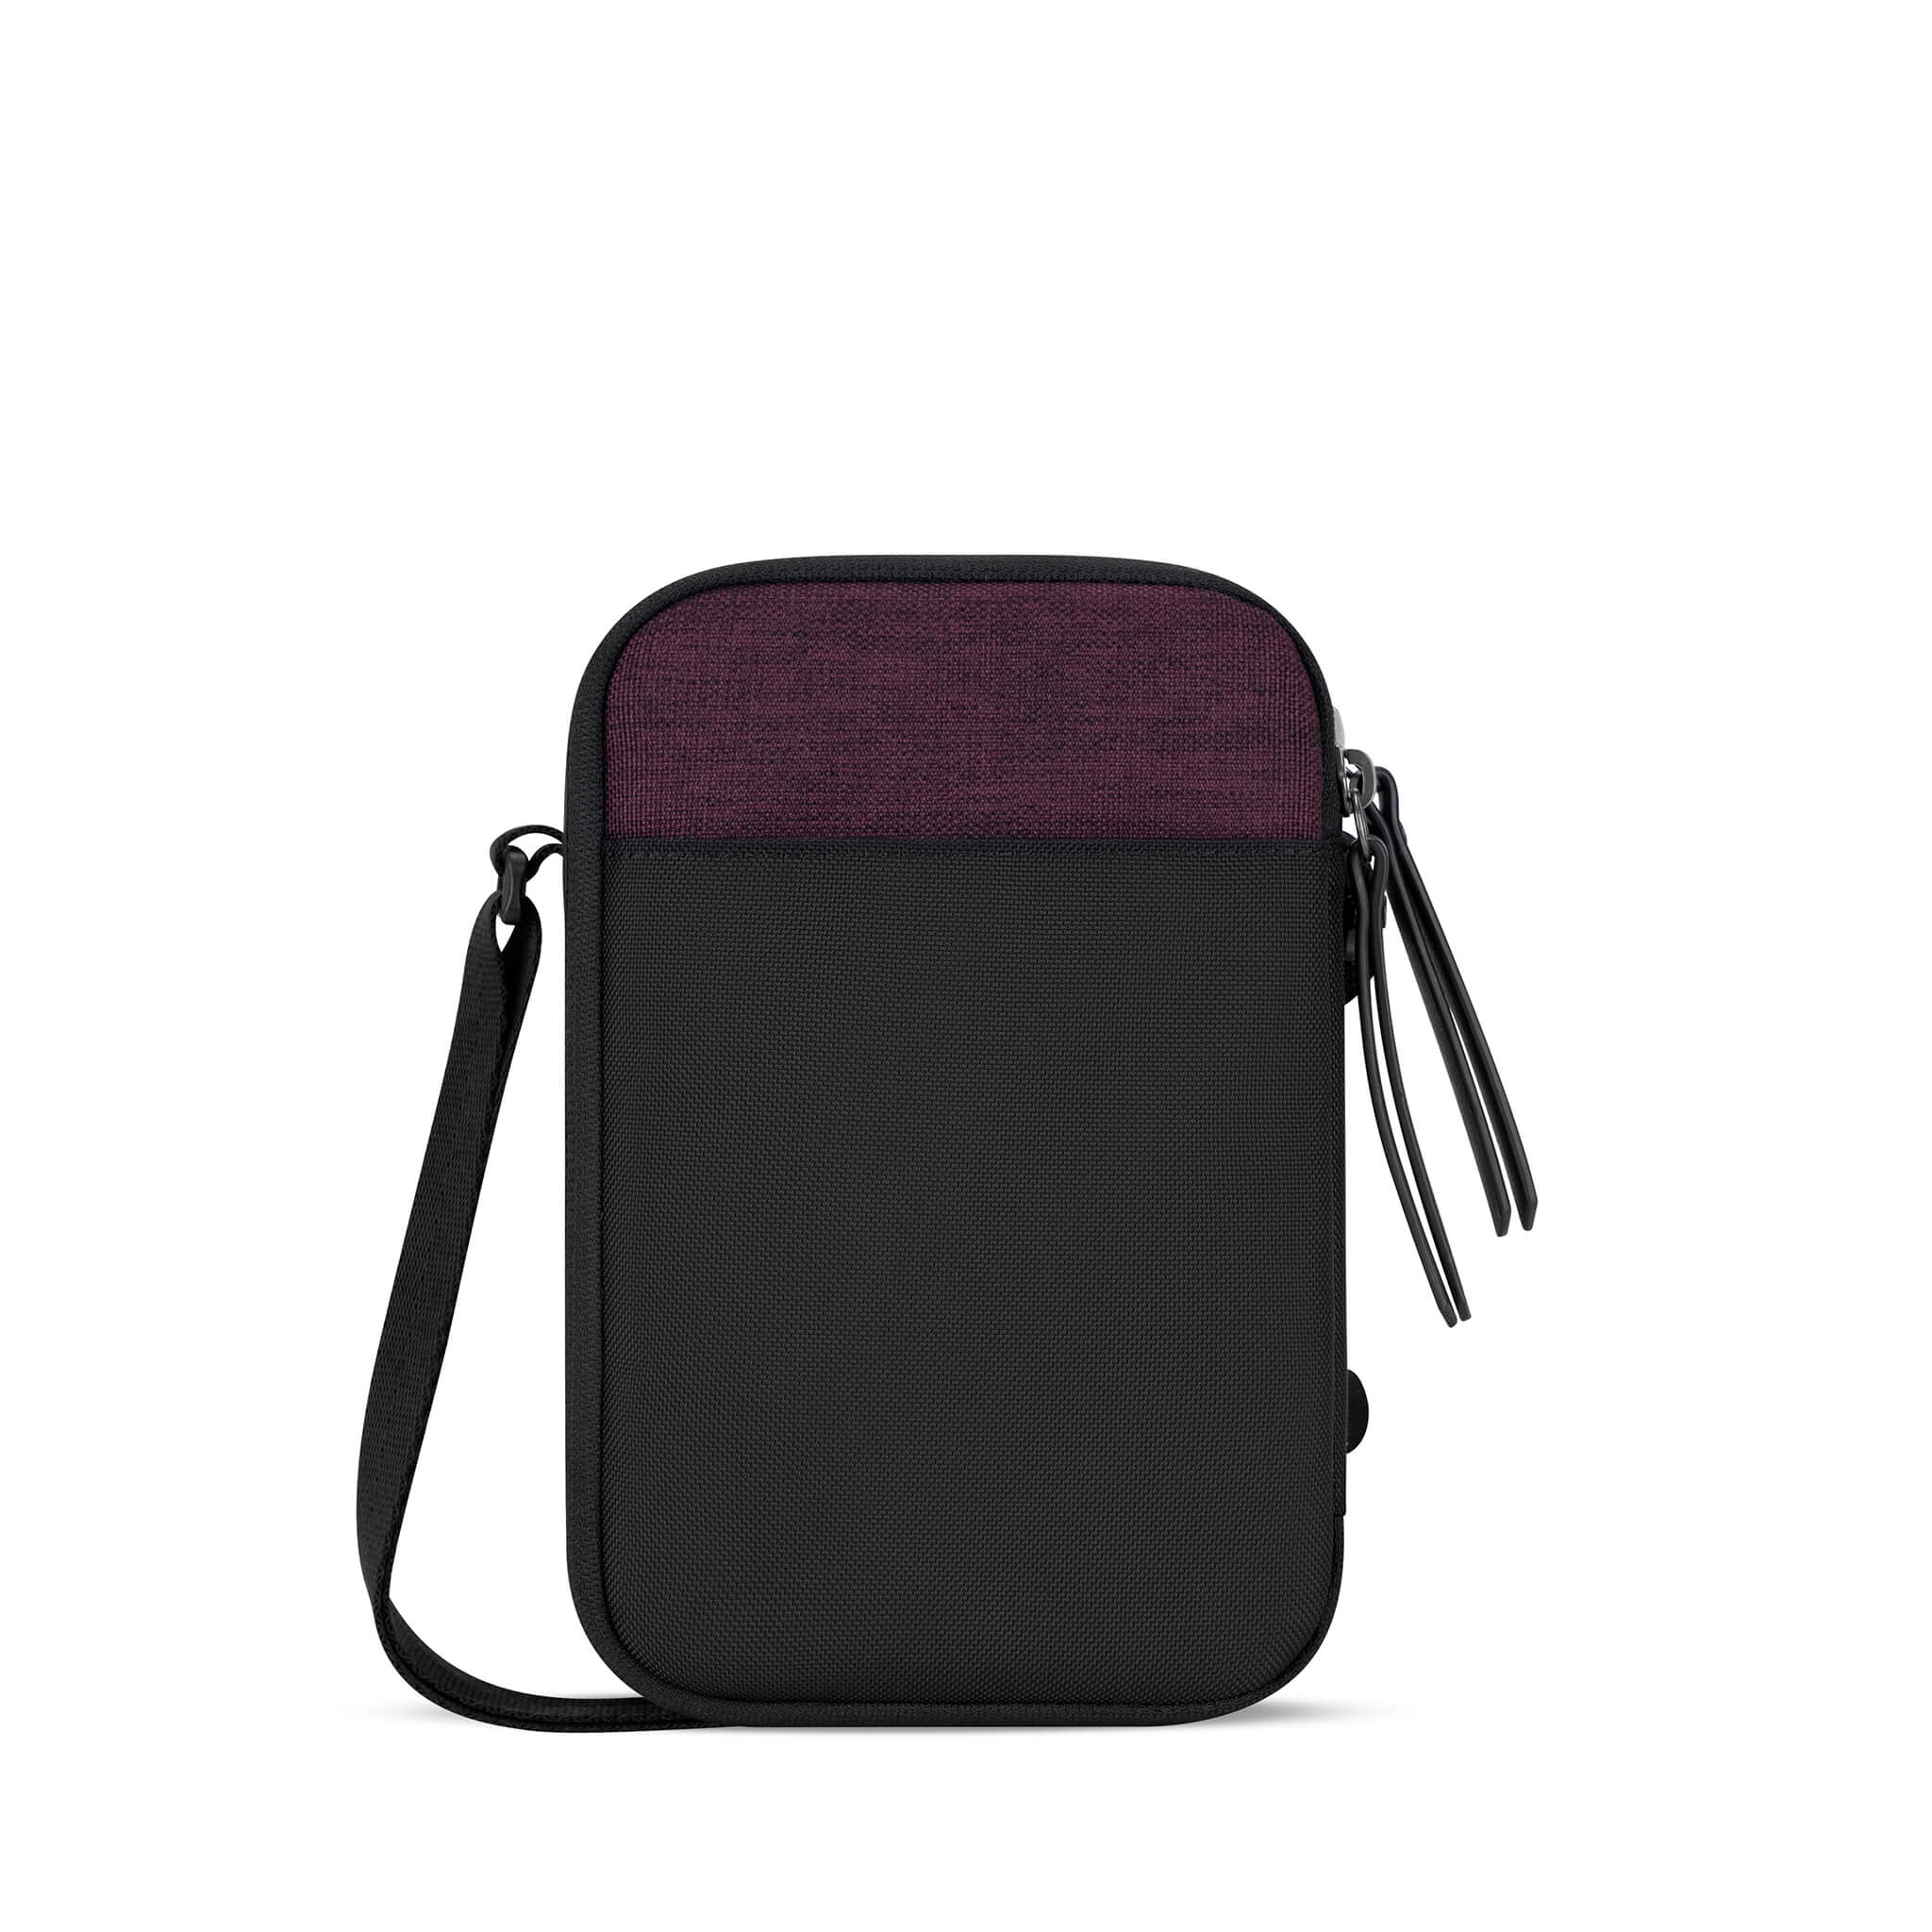 Back view of Sherpani wallet purse, the simplicity in Merlot. The stylish design is complete with RFID protection and a tassel zipper pull. 